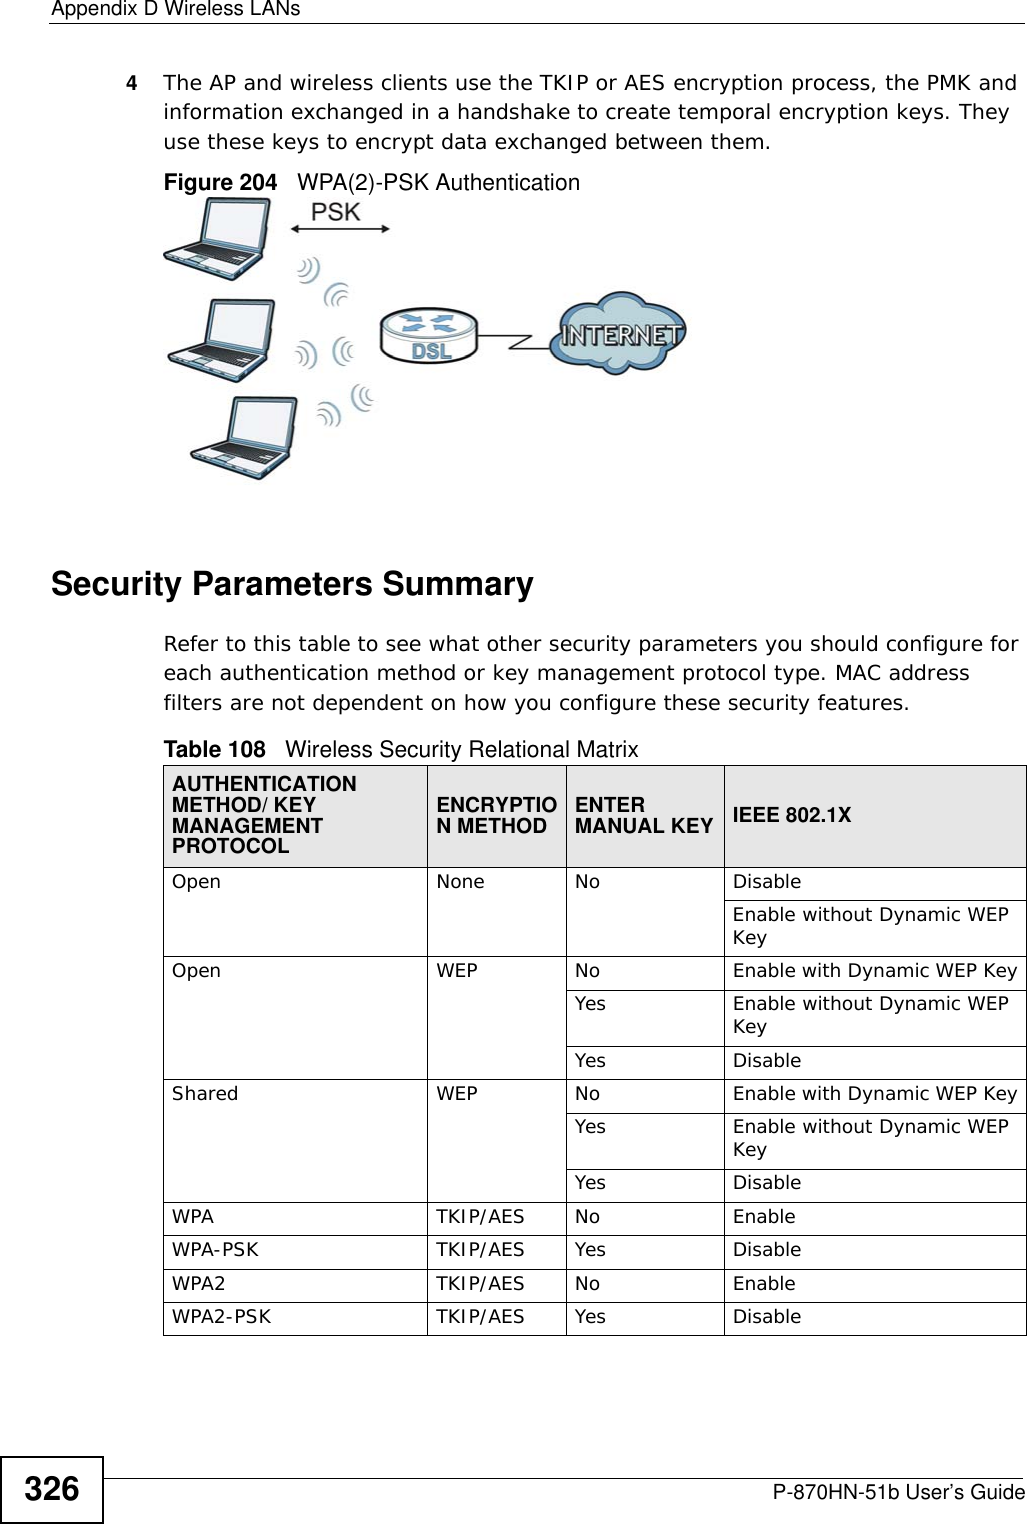 Appendix D Wireless LANsP-870HN-51b User’s Guide3264The AP and wireless clients use the TKIP or AES encryption process, the PMK and information exchanged in a handshake to create temporal encryption keys. They use these keys to encrypt data exchanged between them.Figure 204   WPA(2)-PSK AuthenticationSecurity Parameters SummaryRefer to this table to see what other security parameters you should configure for each authentication method or key management protocol type. MAC address filters are not dependent on how you configure these security features.Table 108   Wireless Security Relational MatrixAUTHENTICATION METHOD/ KEY MANAGEMENT PROTOCOLENCRYPTION METHOD ENTER MANUAL KEY IEEE 802.1XOpen None No DisableEnable without Dynamic WEP KeyOpen WEP No           Enable with Dynamic WEP KeyYes Enable without Dynamic WEP KeyYes DisableShared WEP  No           Enable with Dynamic WEP KeyYes Enable without Dynamic WEP KeyYes DisableWPA  TKIP/AES No EnableWPA-PSK  TKIP/AES Yes DisableWPA2 TKIP/AES No EnableWPA2-PSK  TKIP/AES Yes Disable